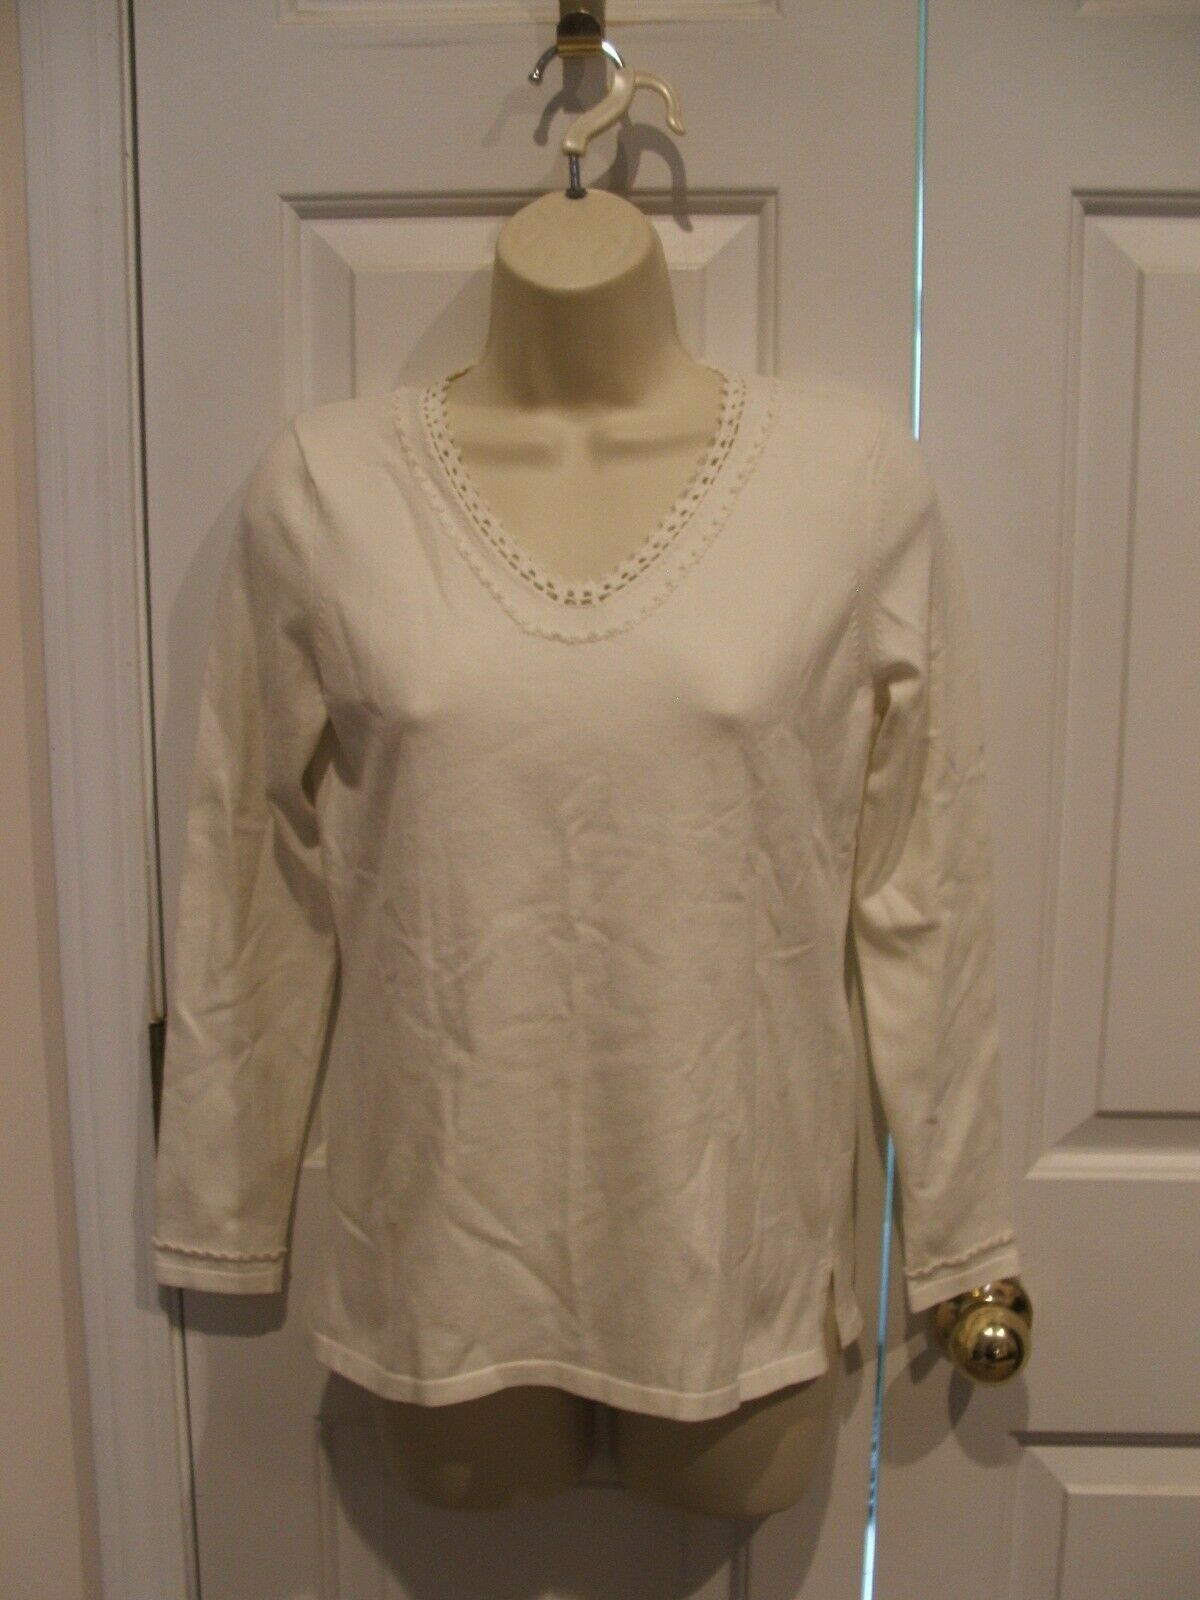 NWT  org.$49 Charter Club  Petite ivory long sleeve  top size petite pp - $16.33